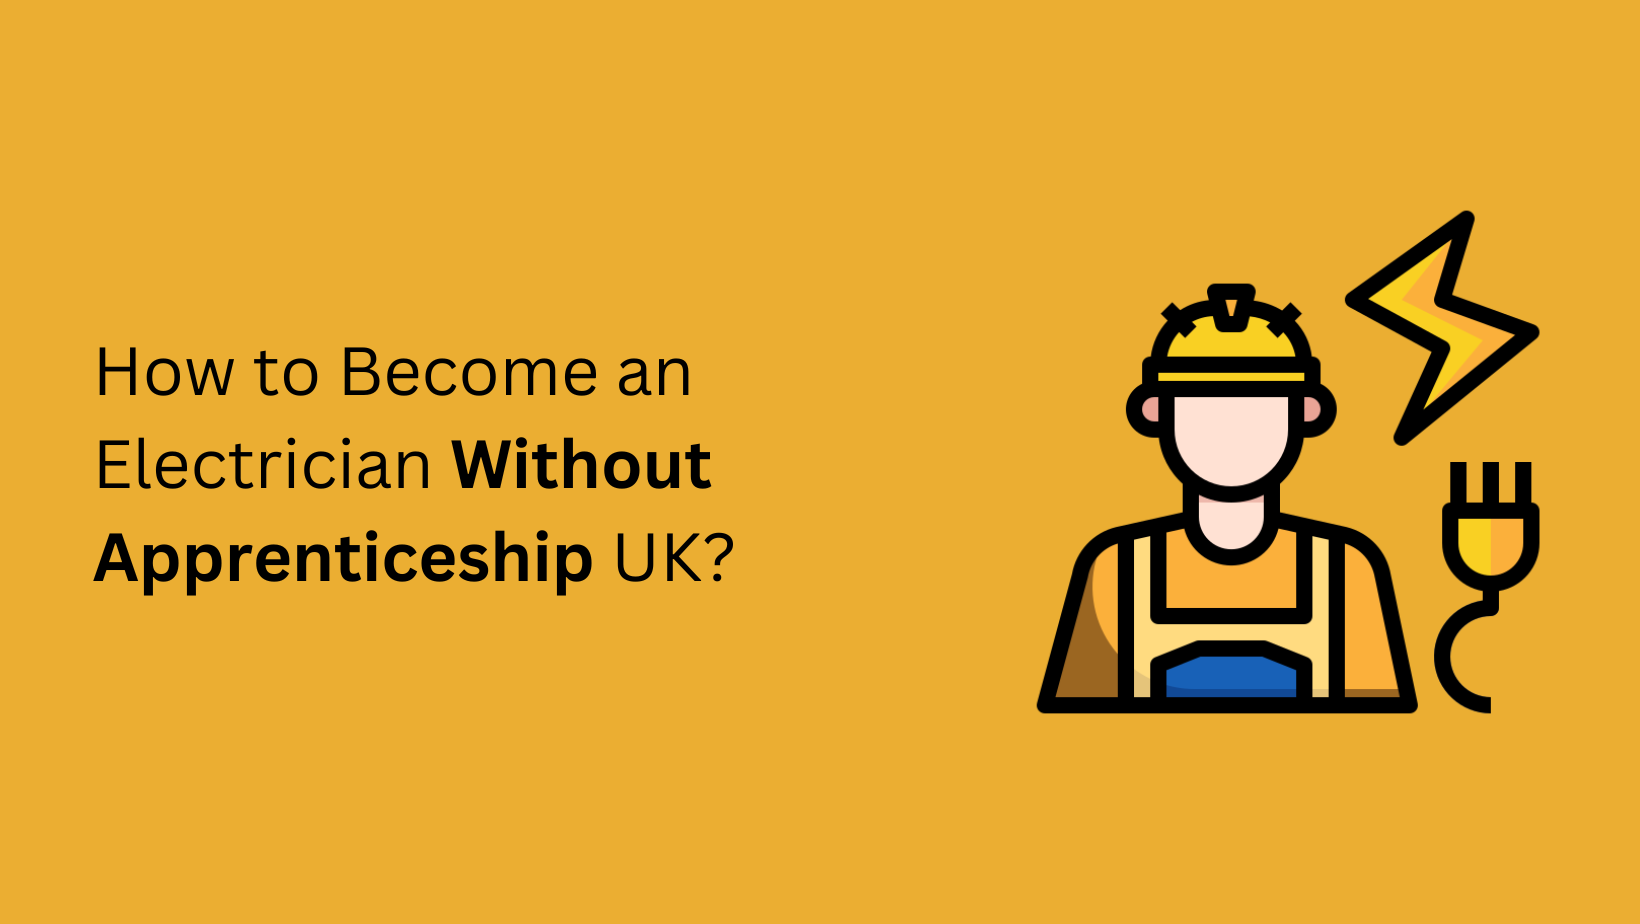 How to Become an Electrician Without Apprenticeship UK